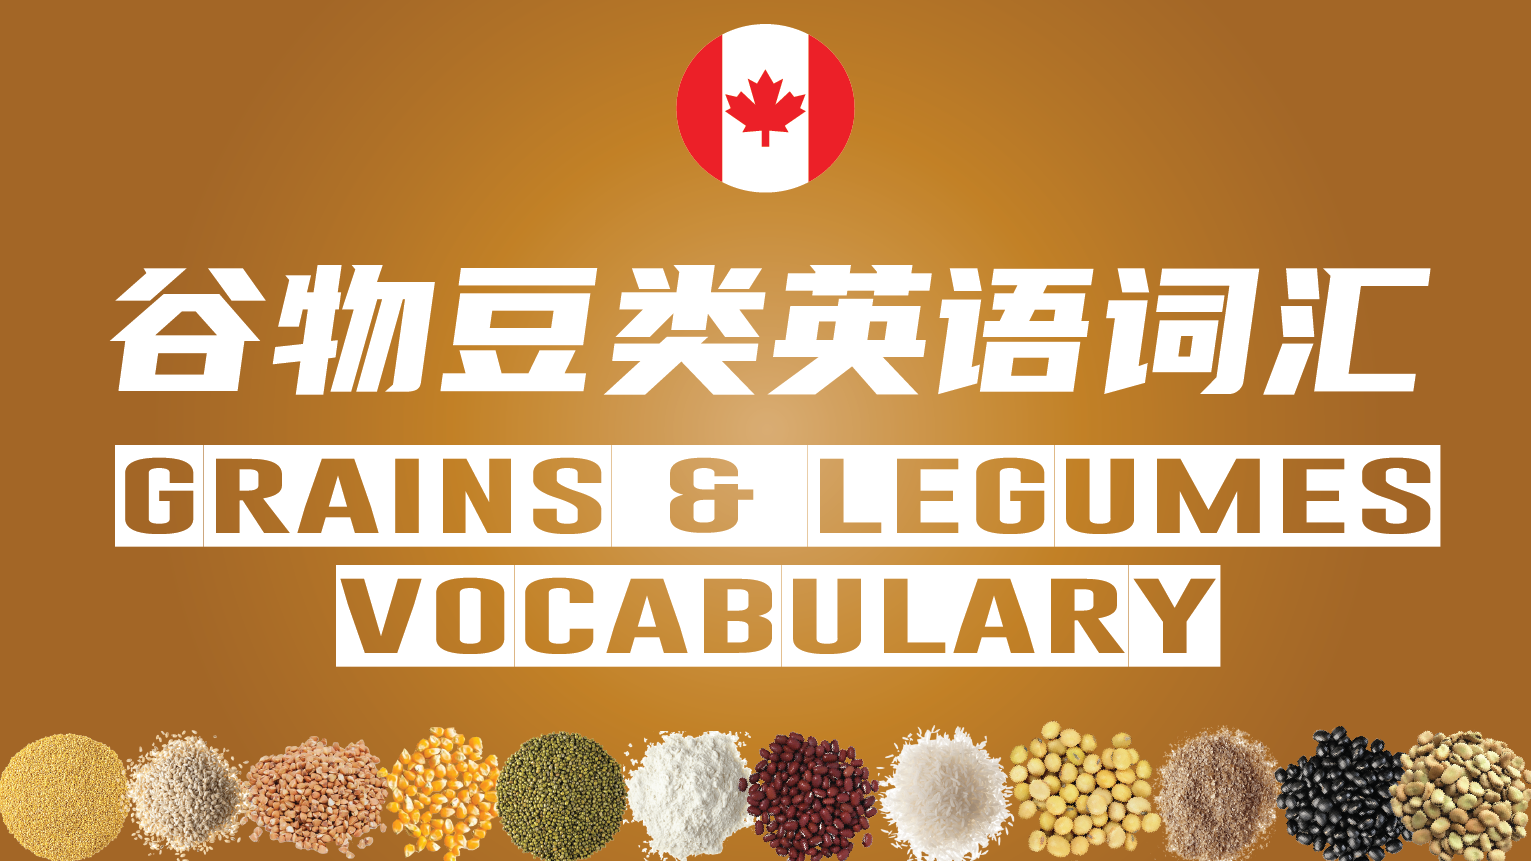 Grains and Legumes Vocabulary